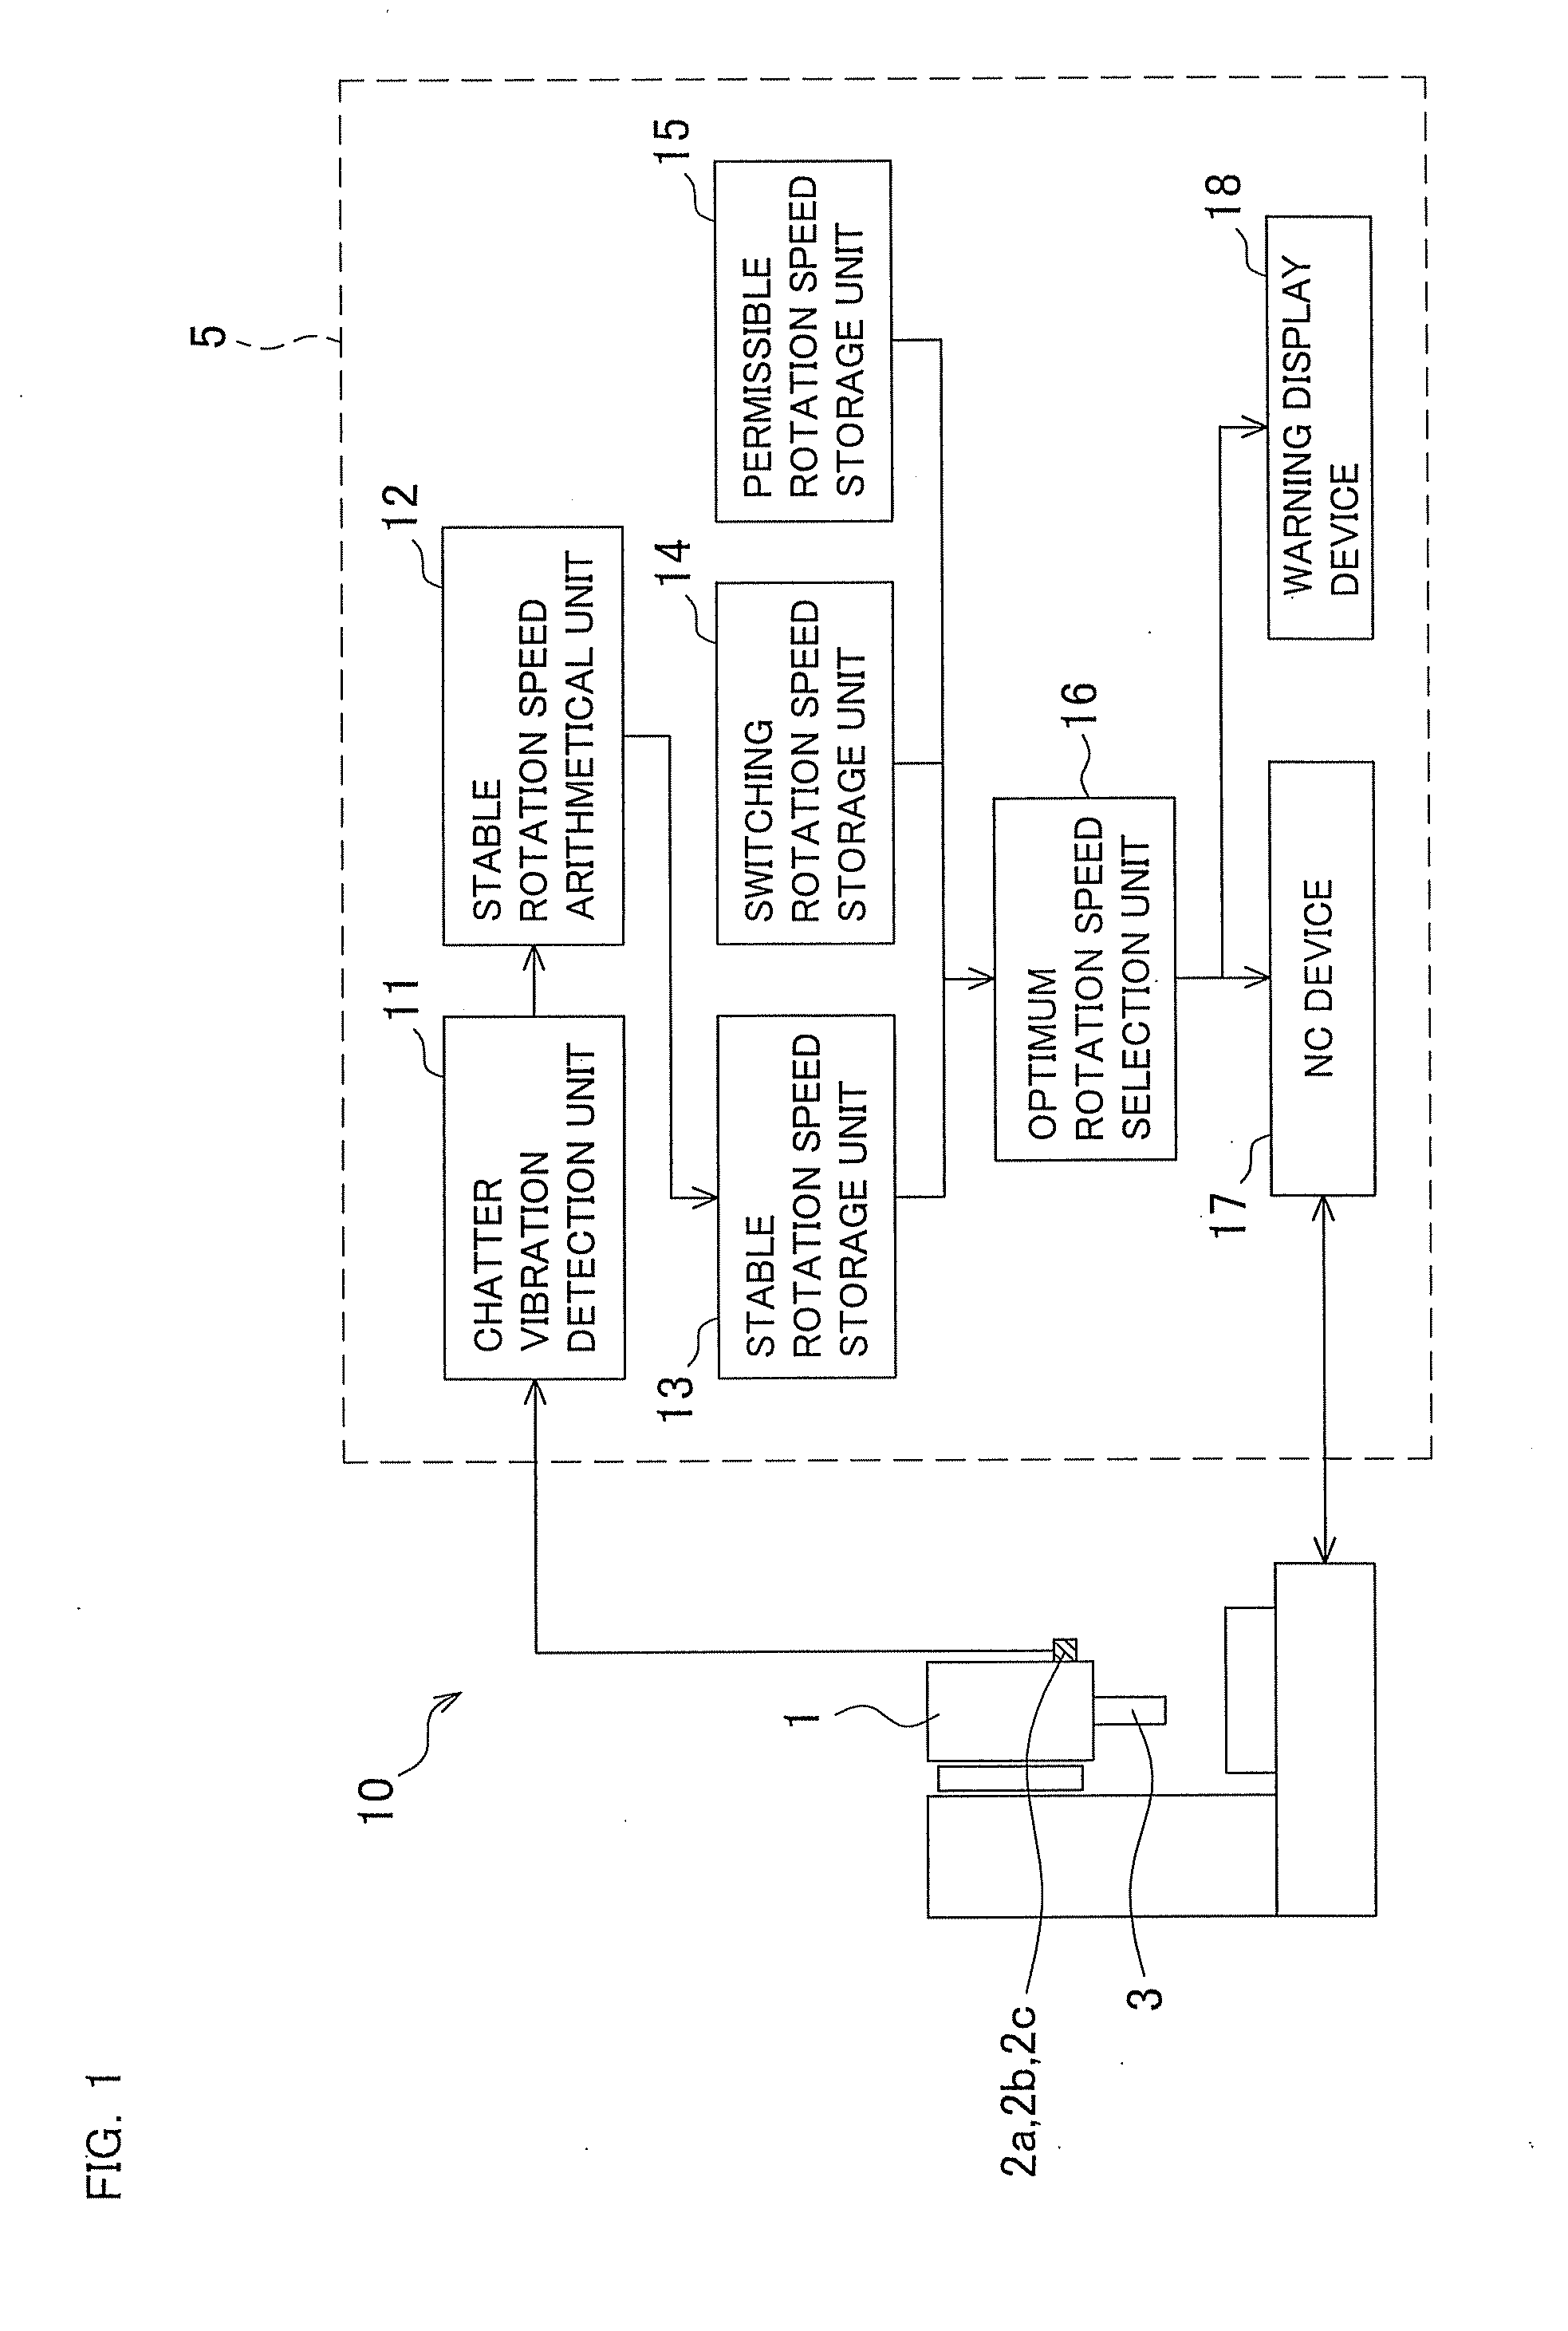 Vibration suppressing method and vibration suppressing device for use in machine tool